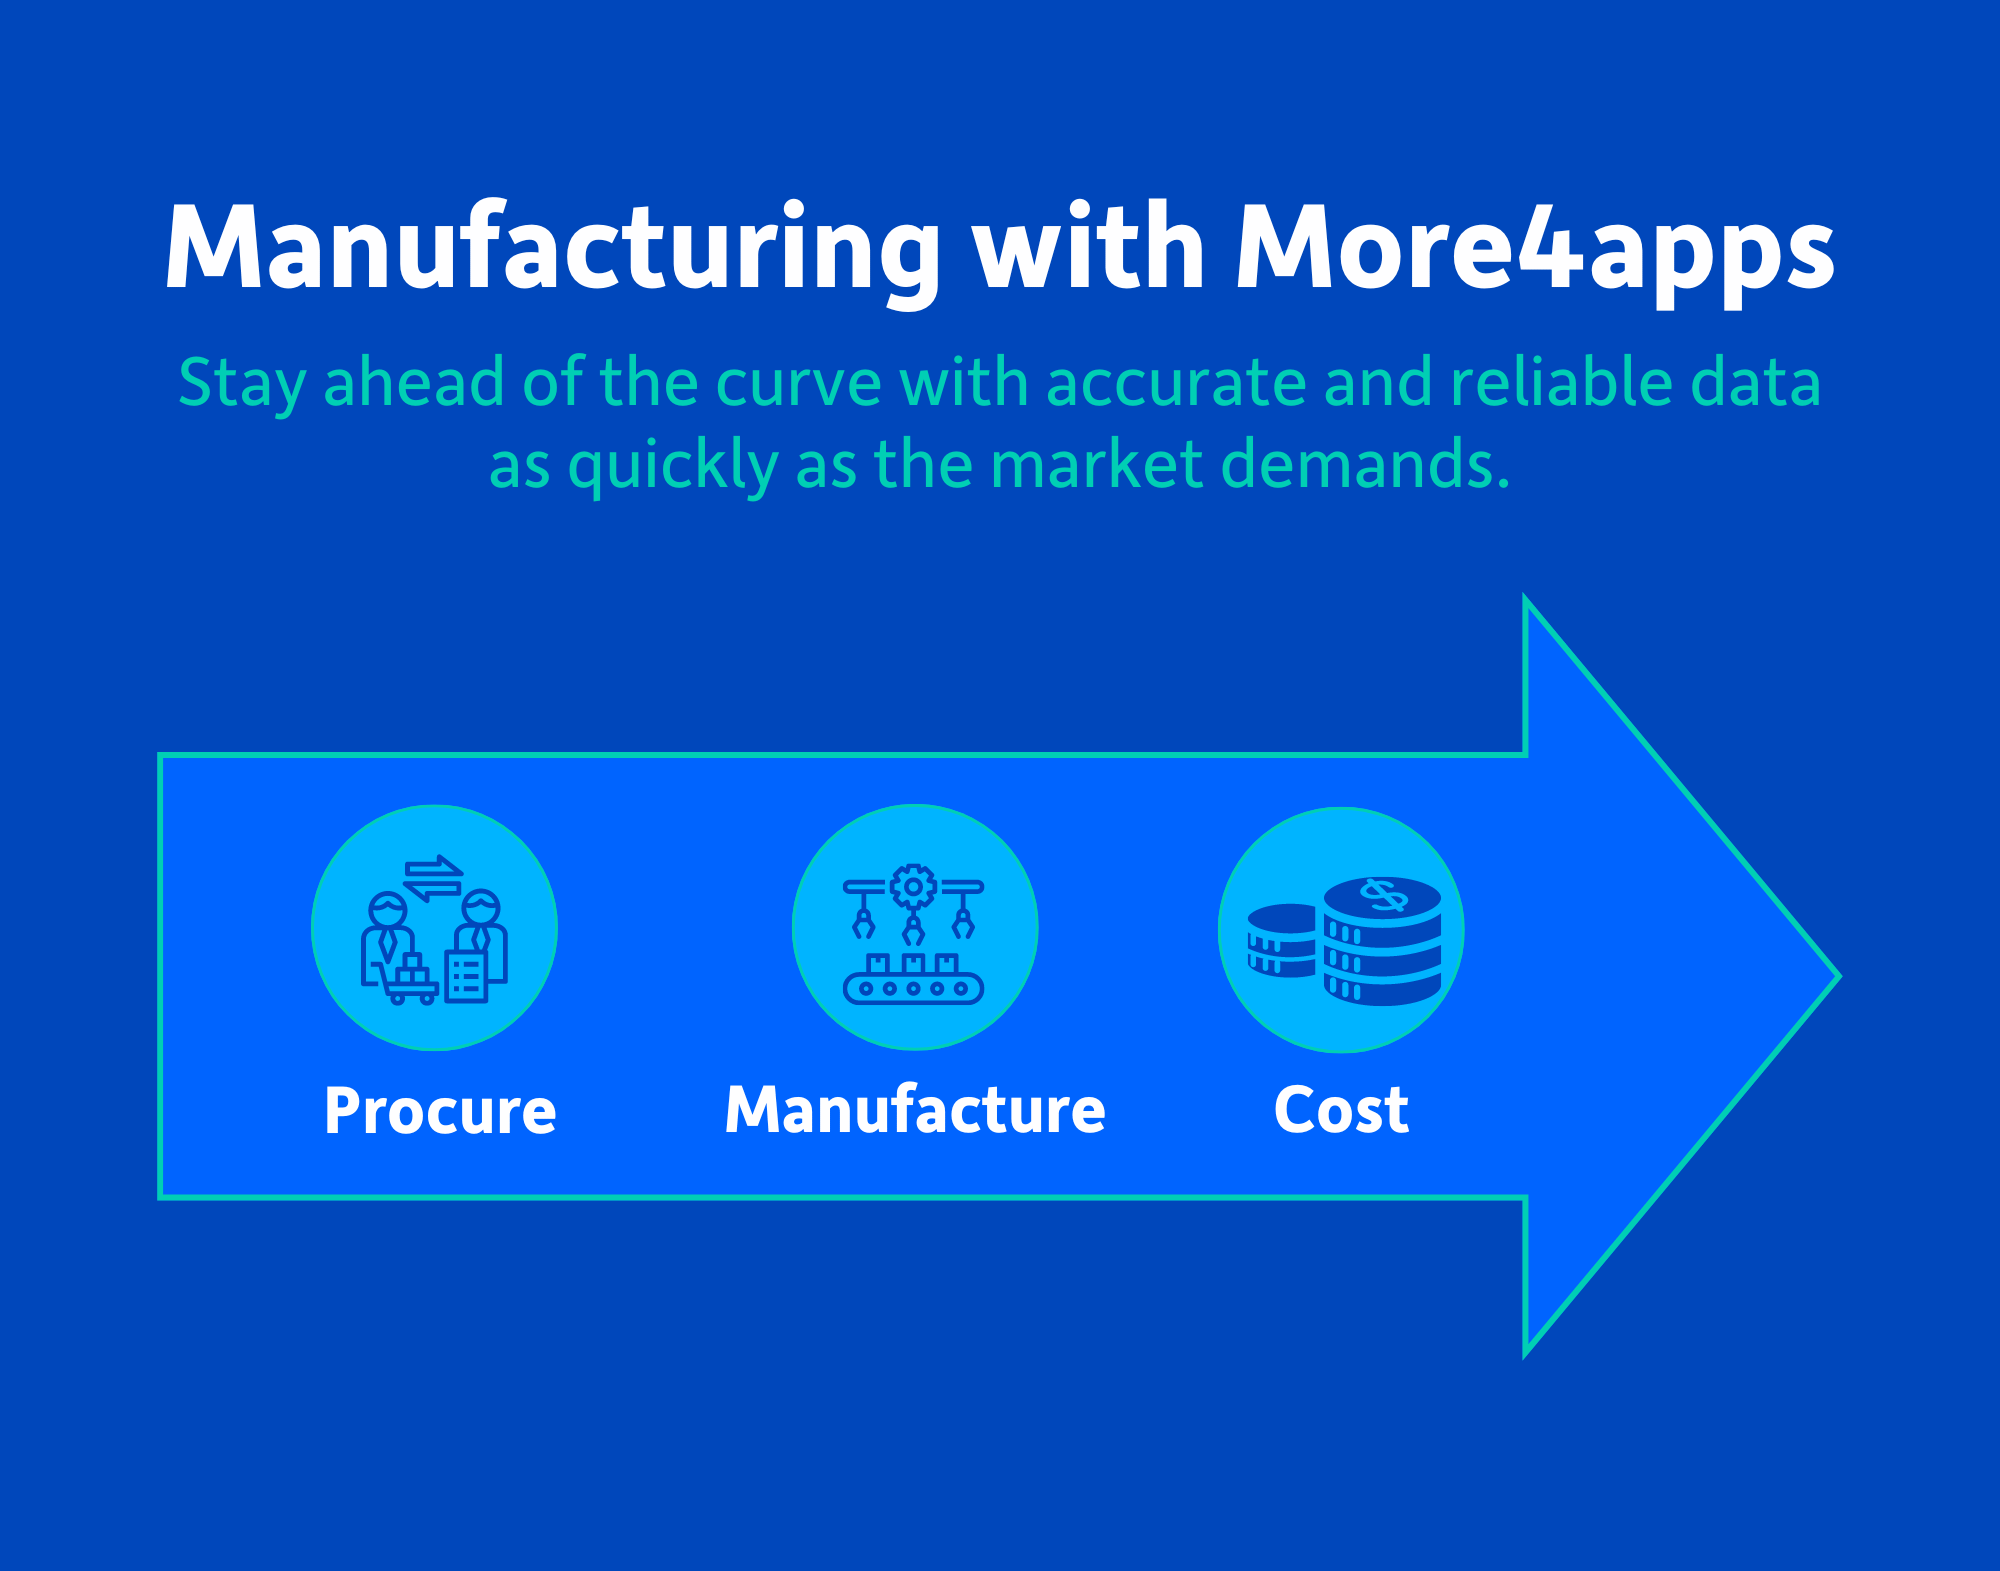 With More4apps tools for manufacturing you will stay ahead of the curve and have accurate reliable data as quickly as the market demands. Click to find out more!